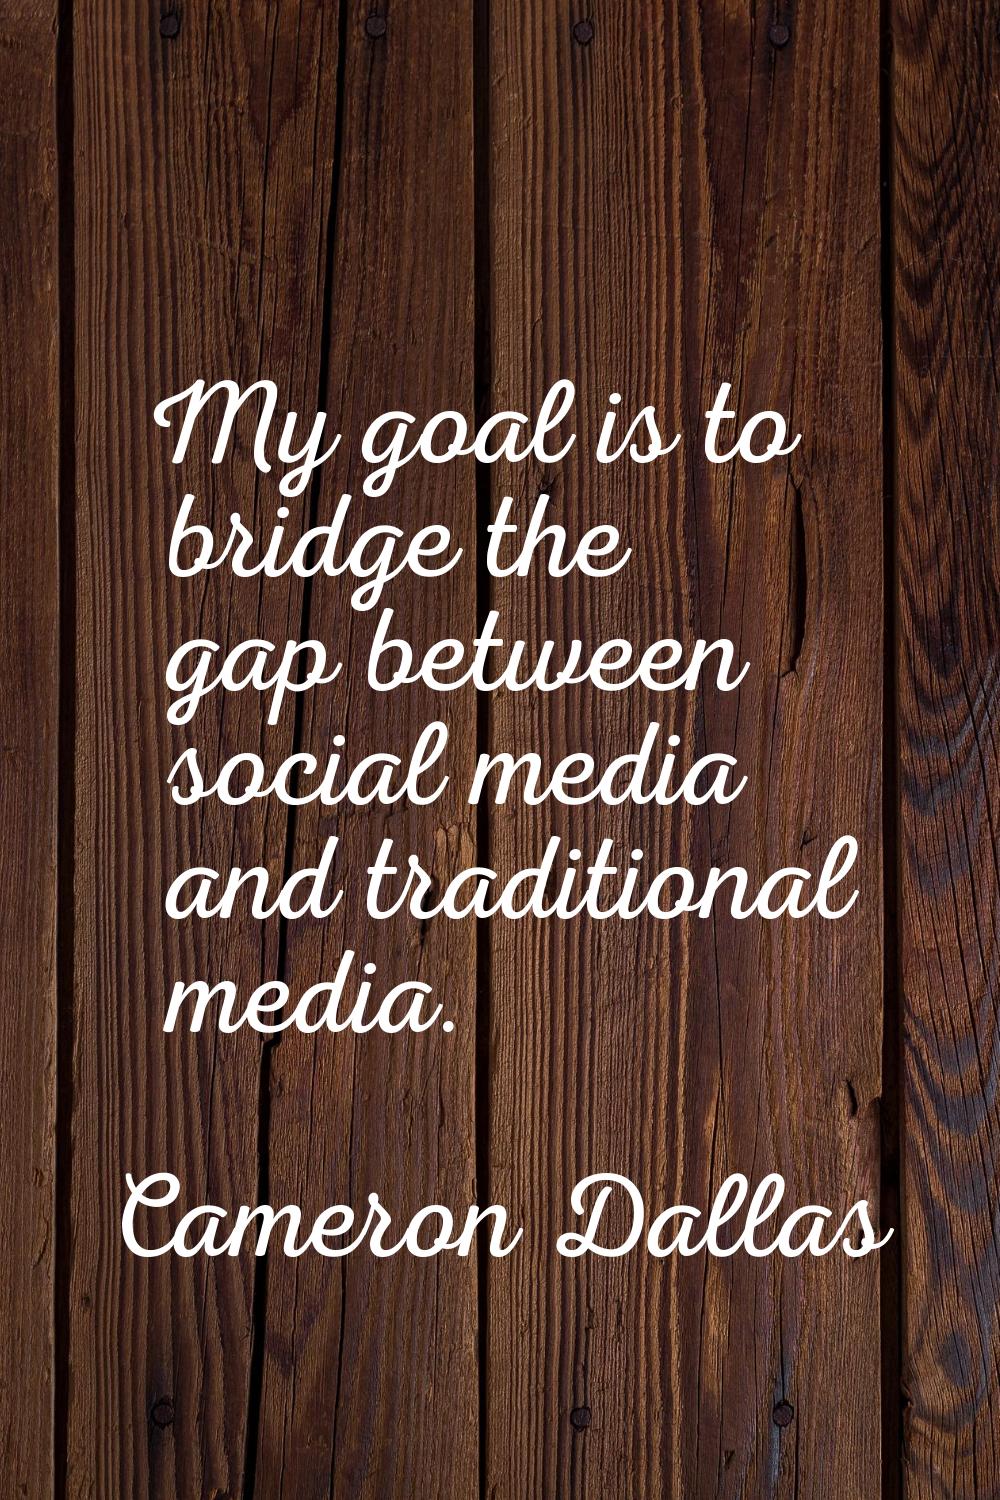 My goal is to bridge the gap between social media and traditional media.